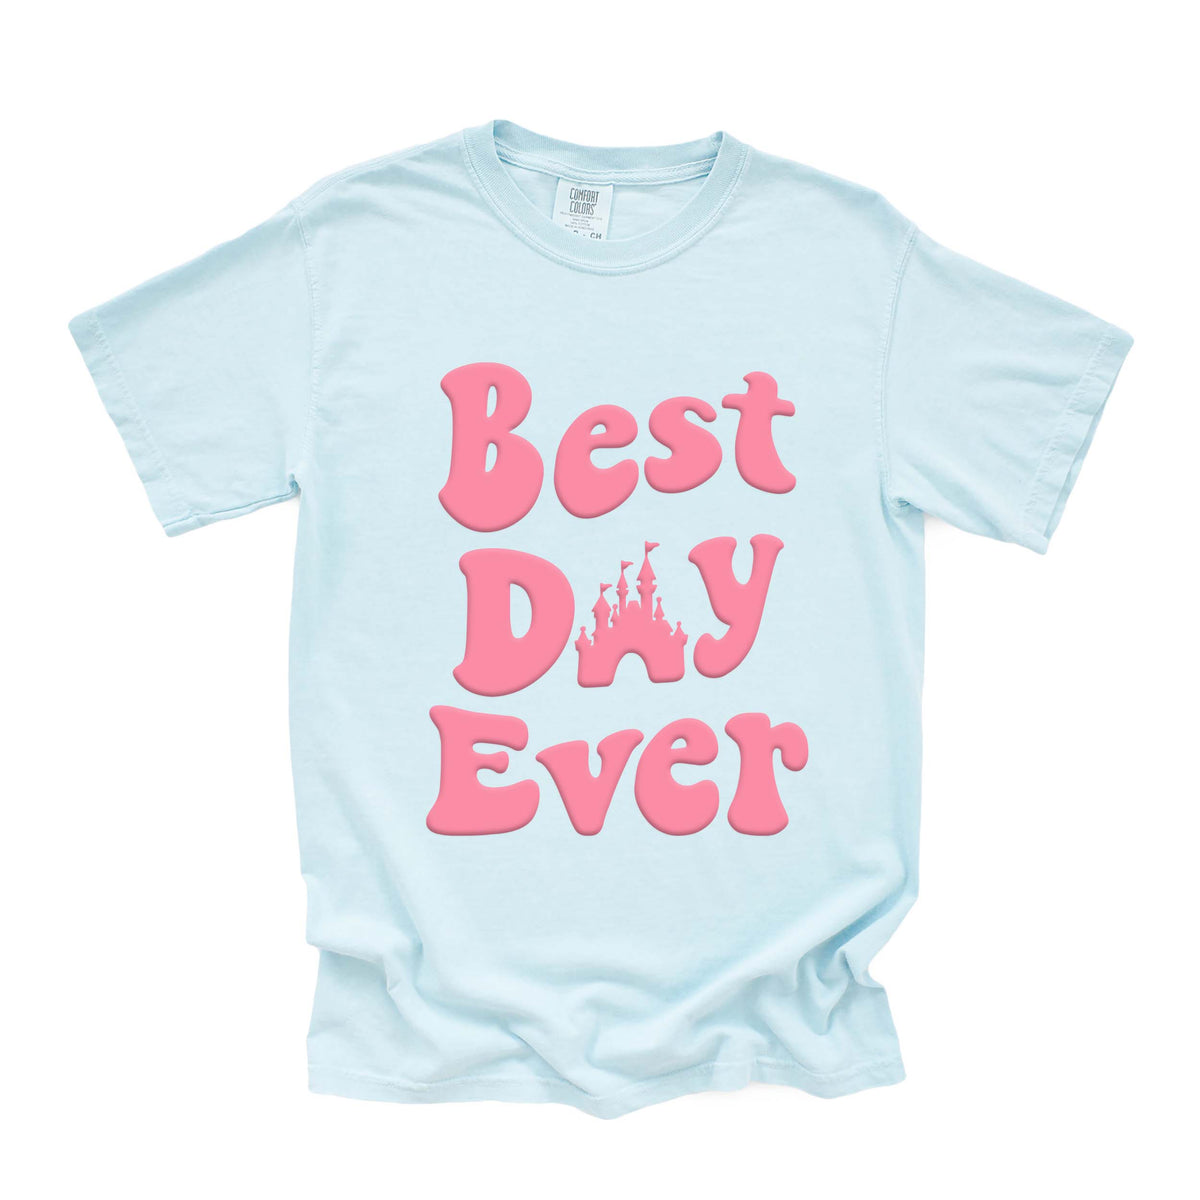 Best Day Ever Embossed Tee - Pink Puff Print